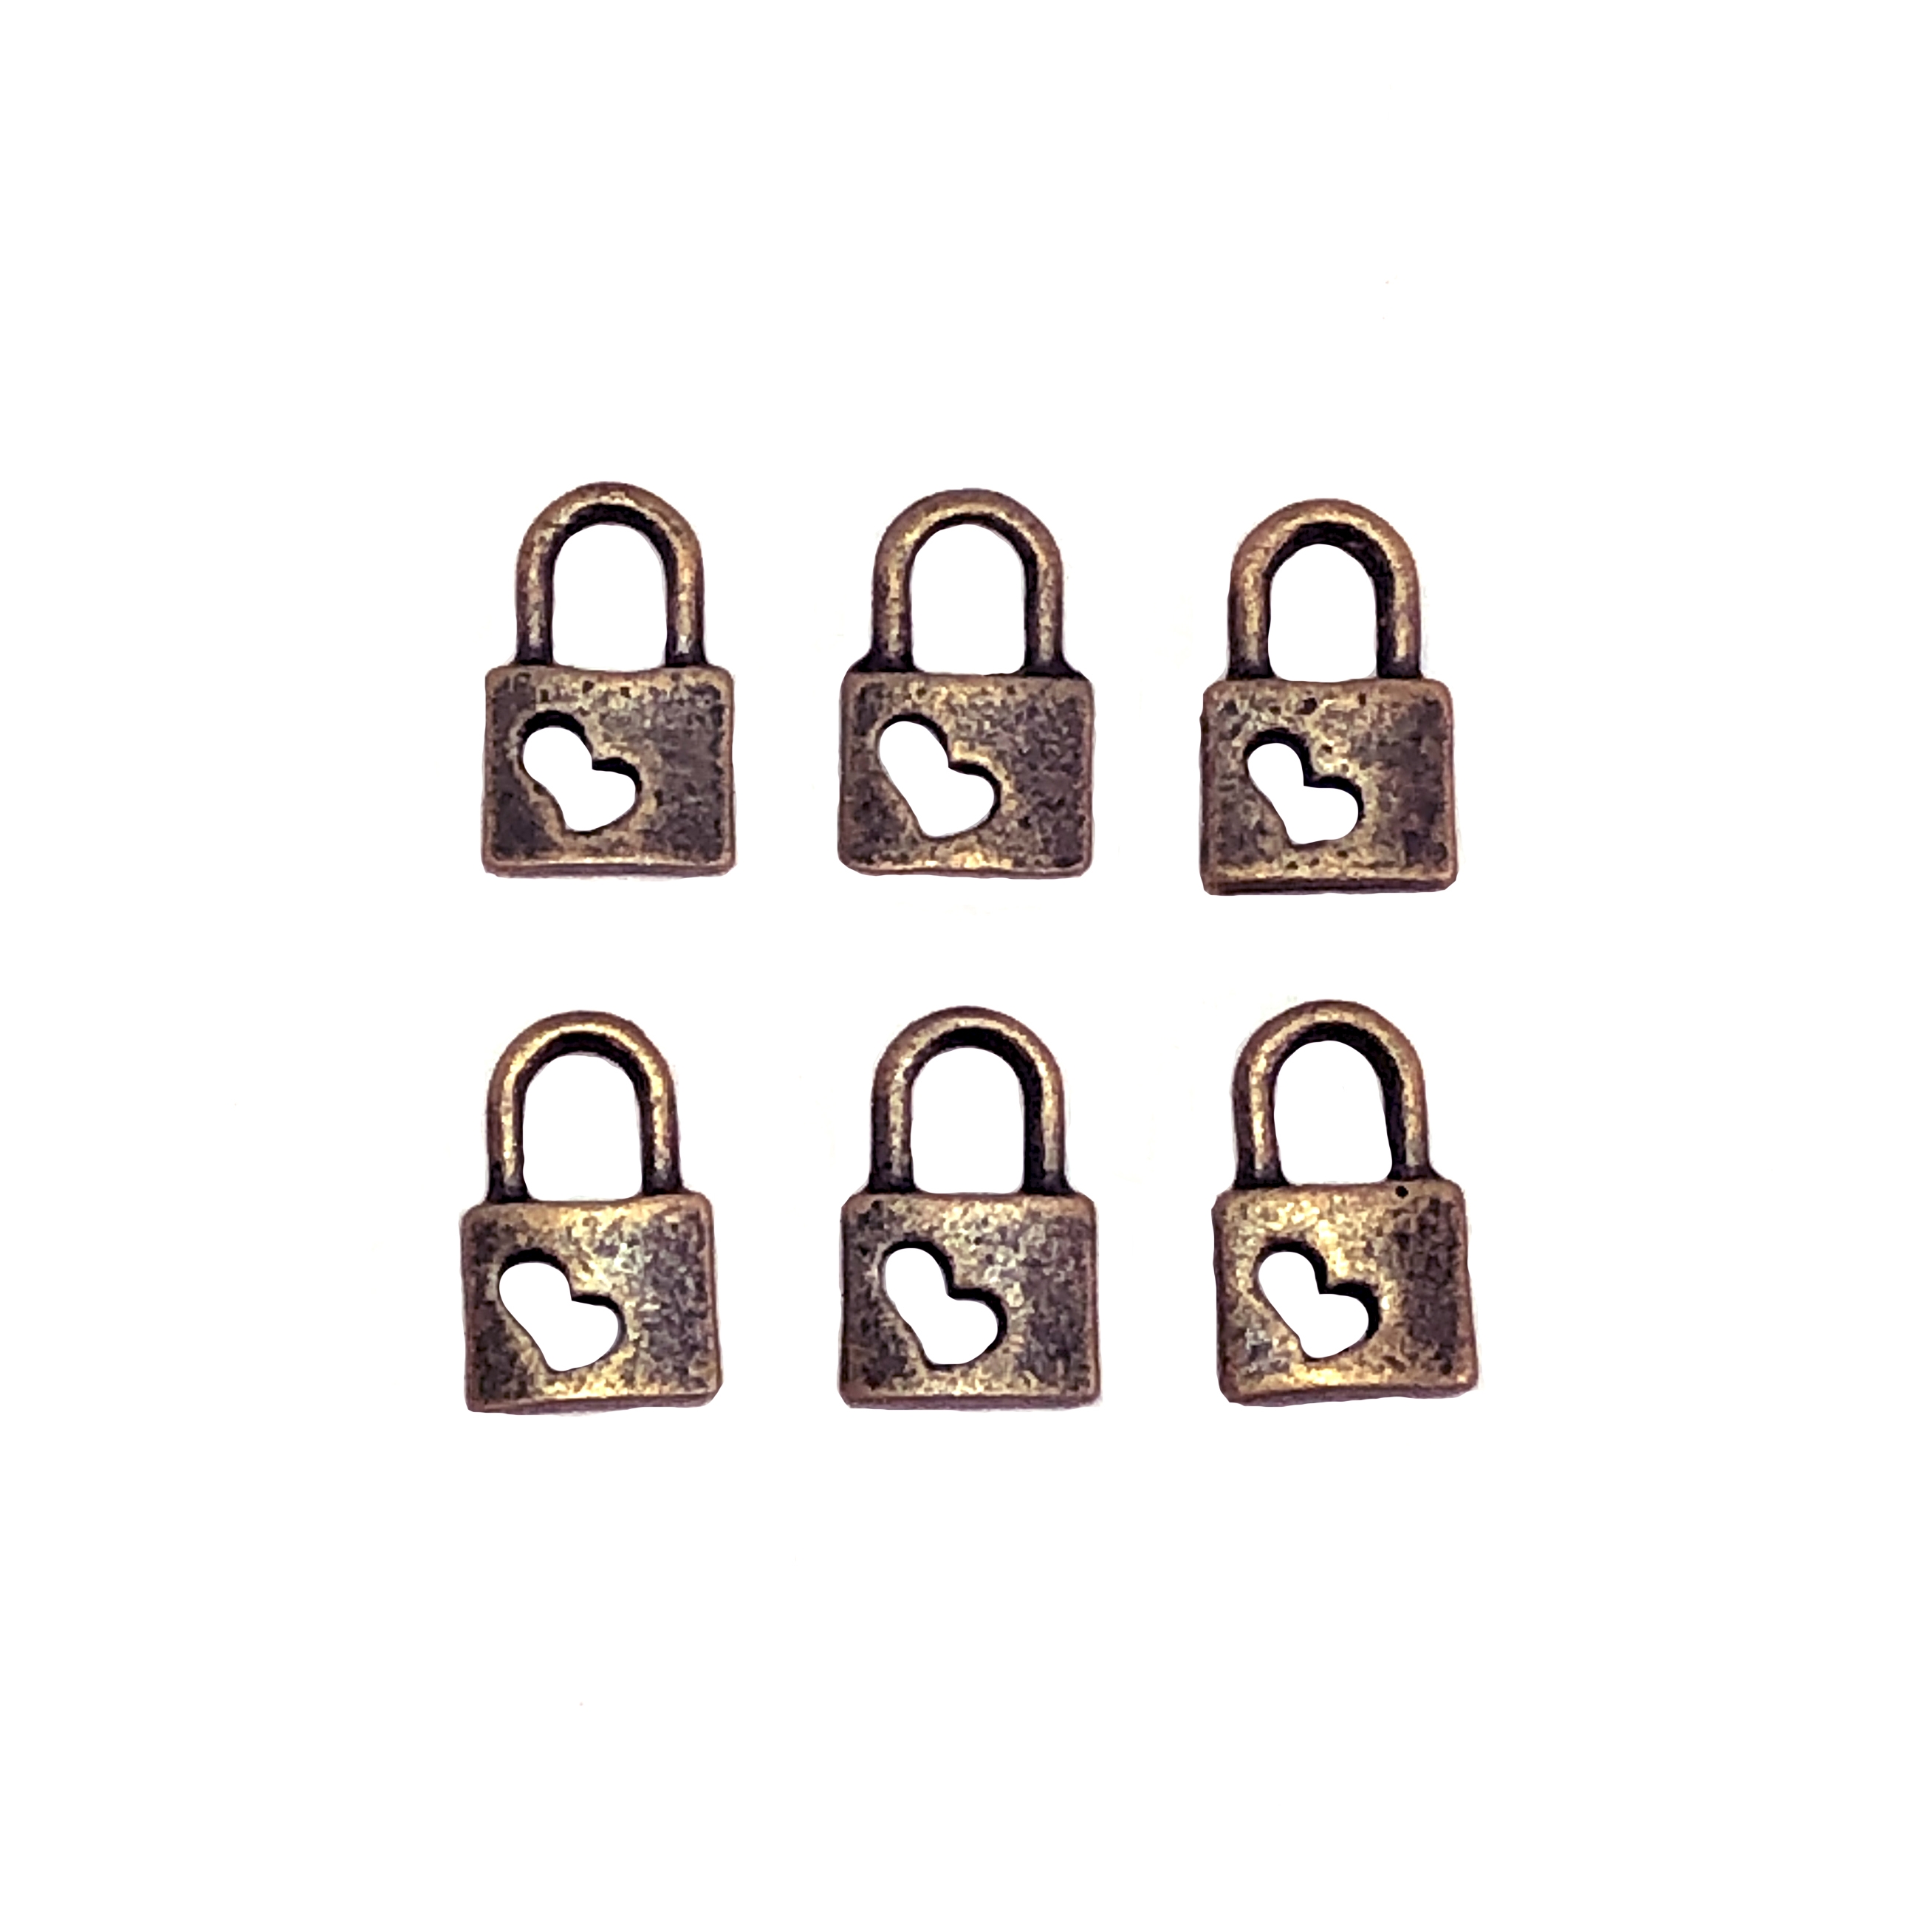 Free Pictures Of Locks